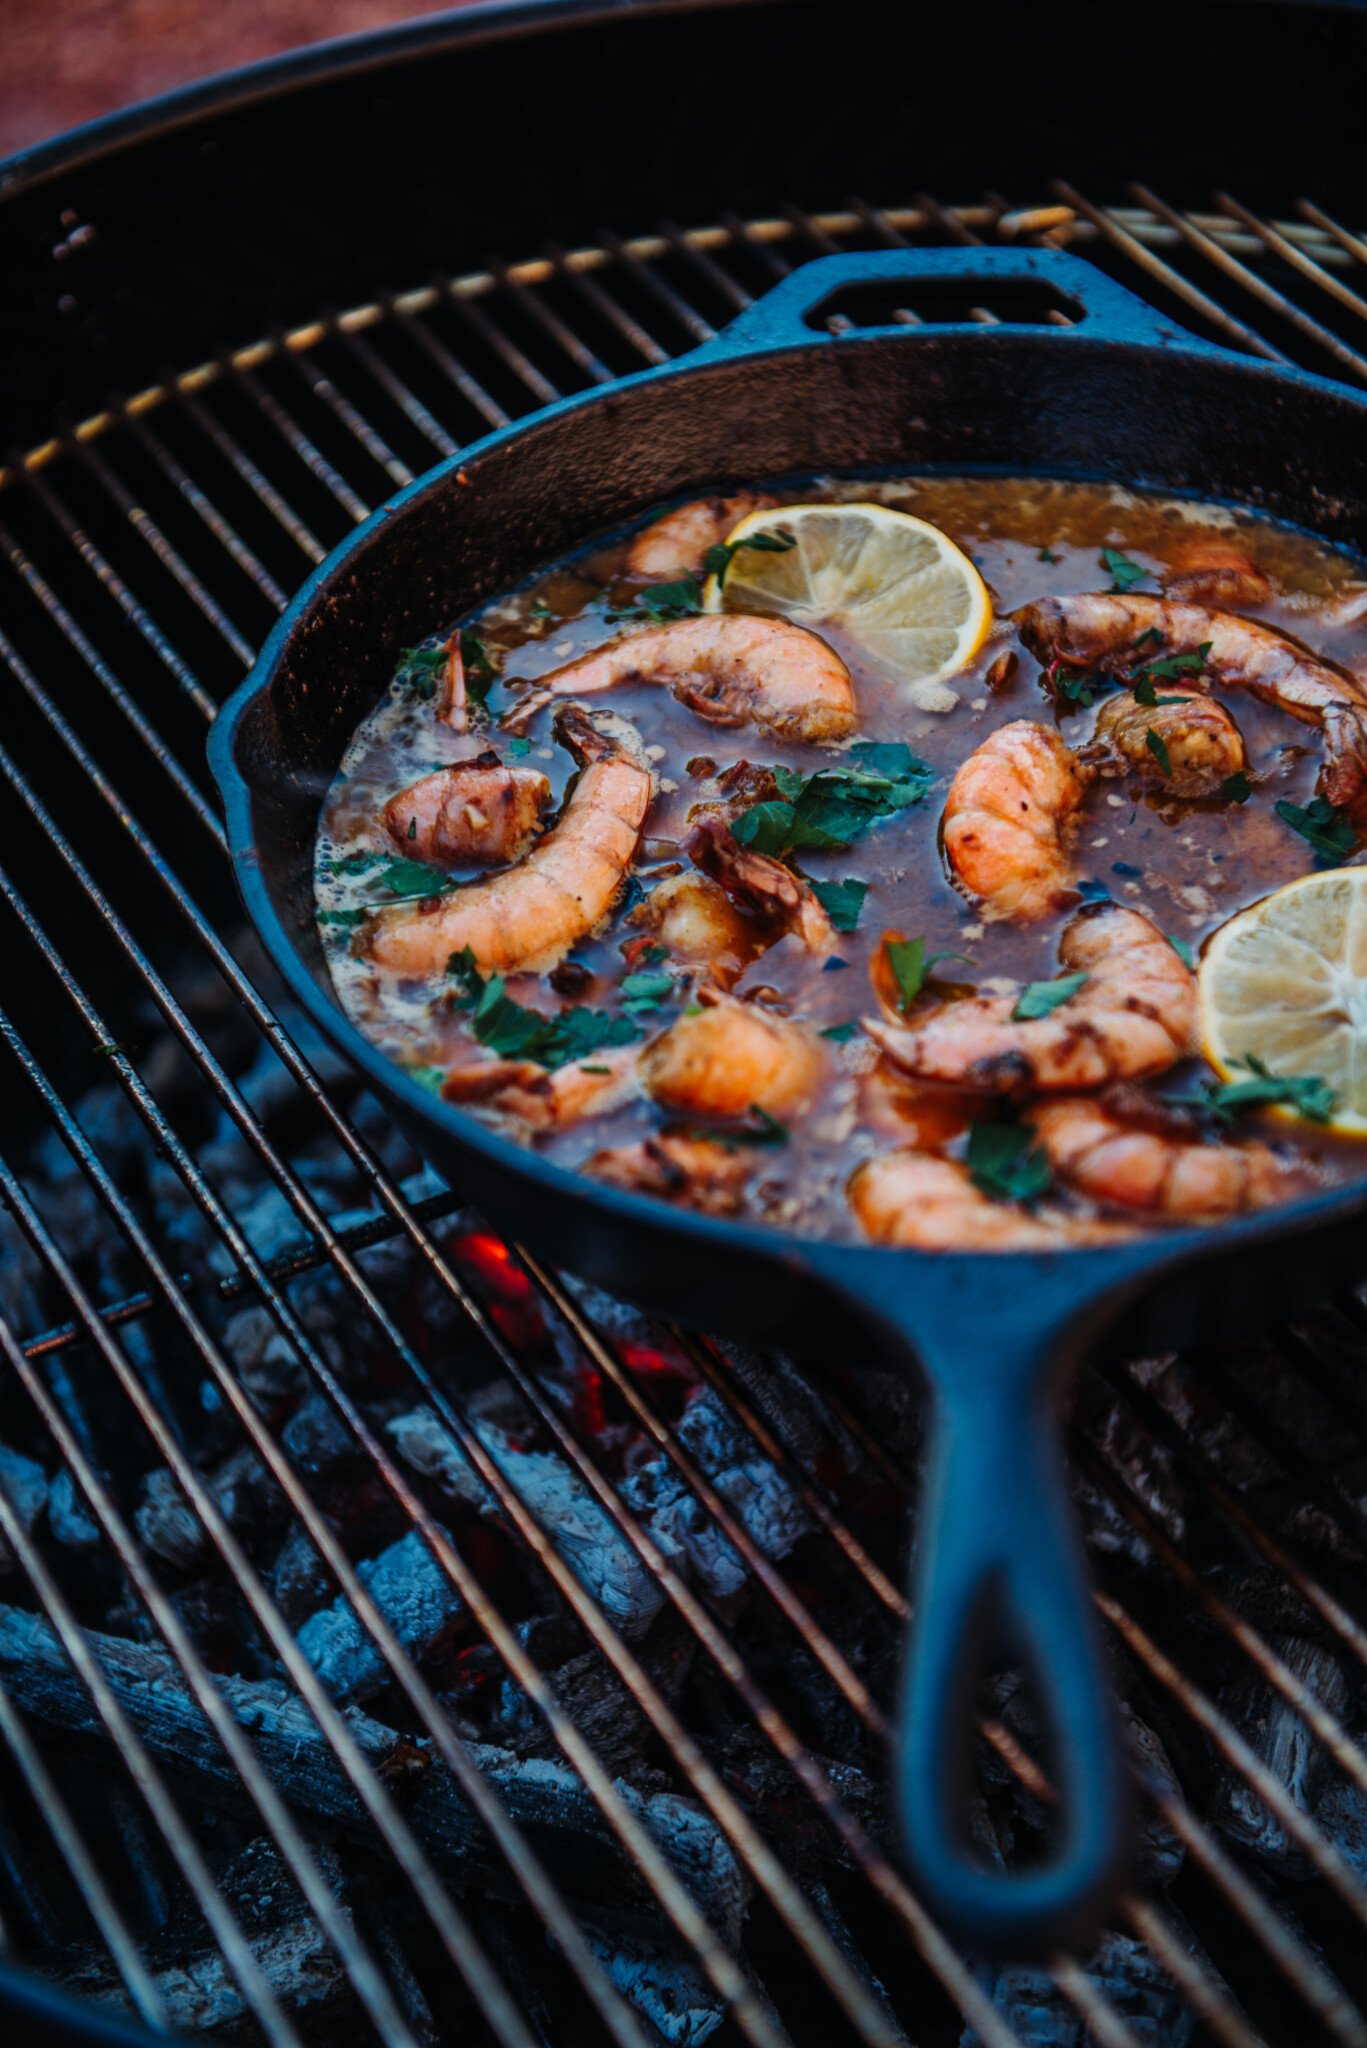 Showing coals and grilling New Orleans BBQ Shrimp in skillet.